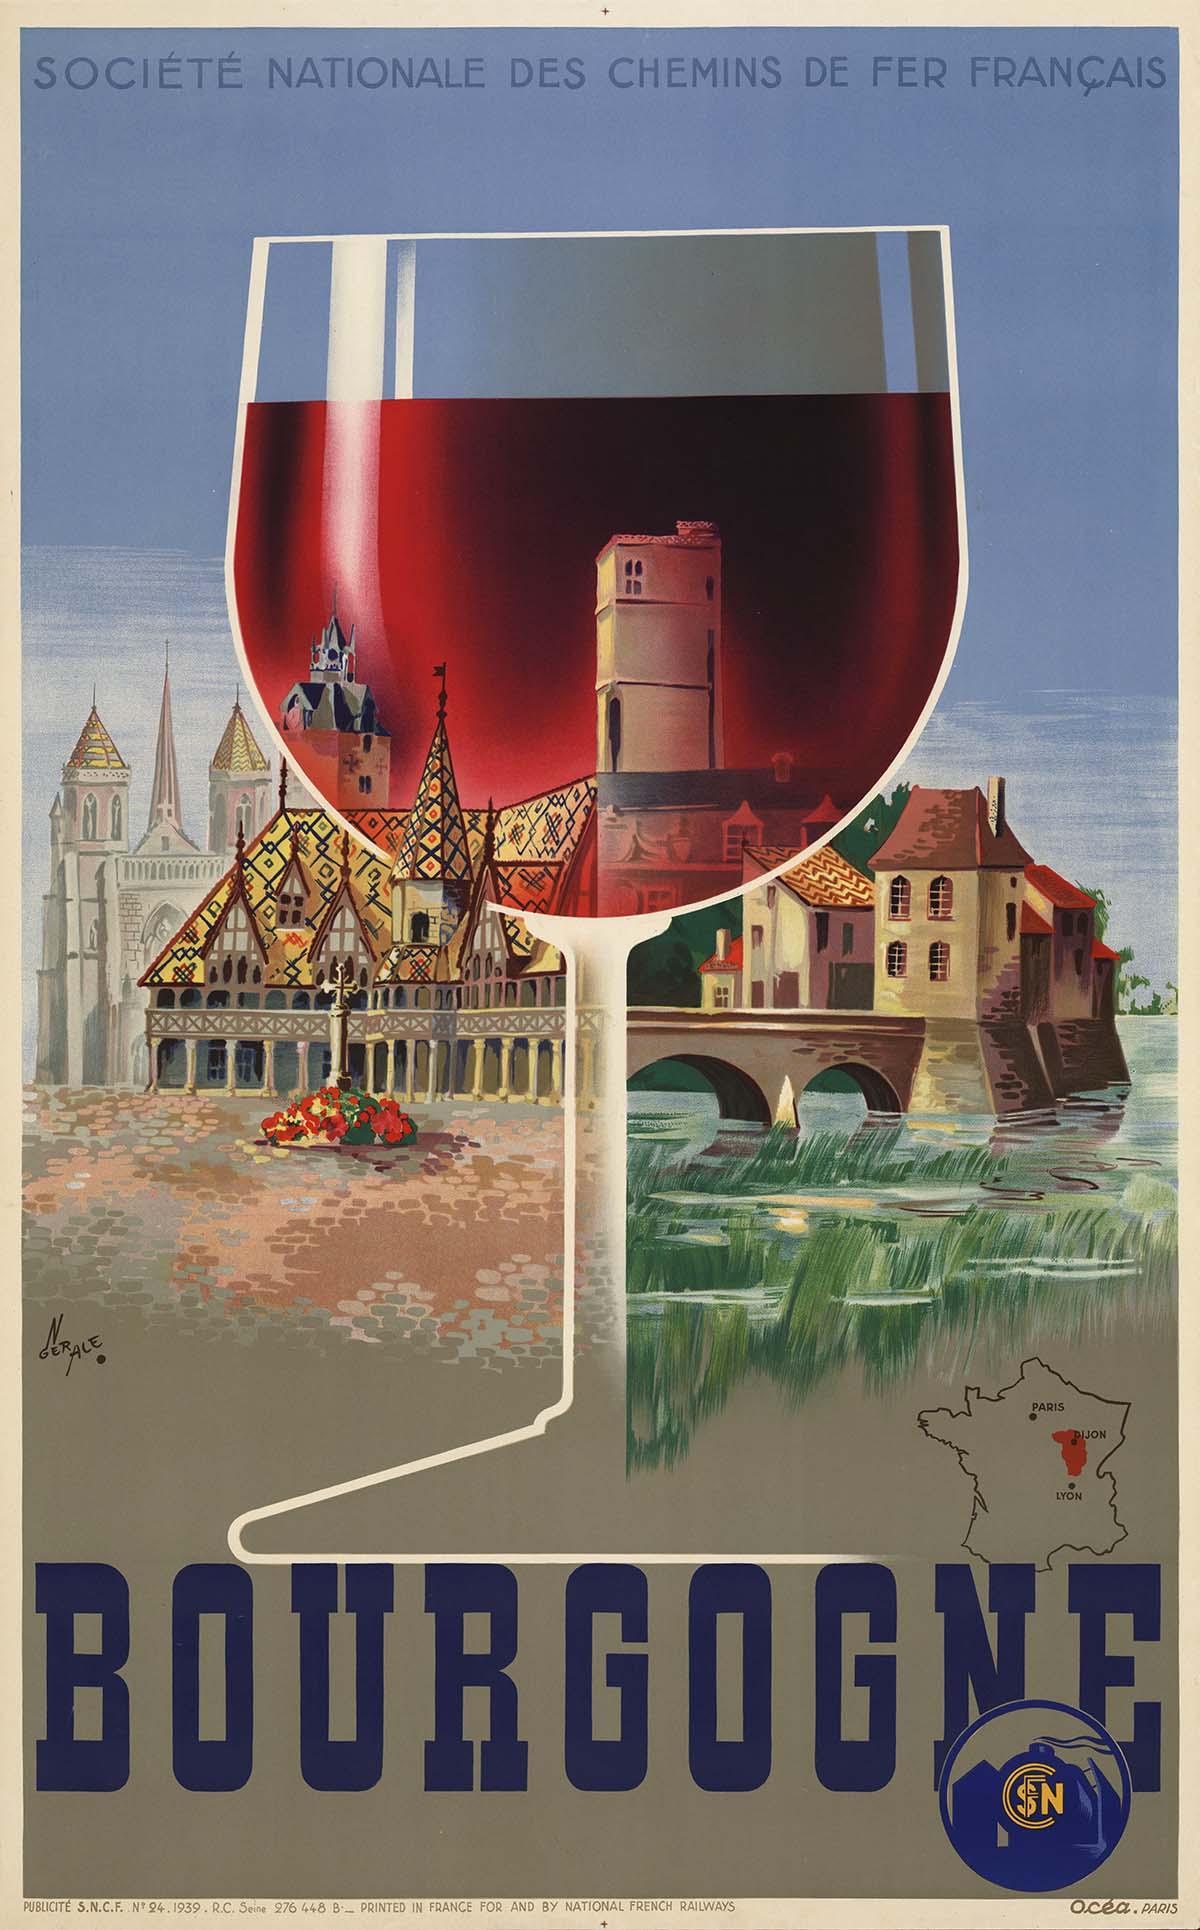 CoolWalls.ca diecut 20" x 32.1" Inches Bourgogne SNCF from 1939 Wine Poster, Wall Decal Sticker Wallpaper, PEEL-N-STICK, removable anytime. Great for a classroom